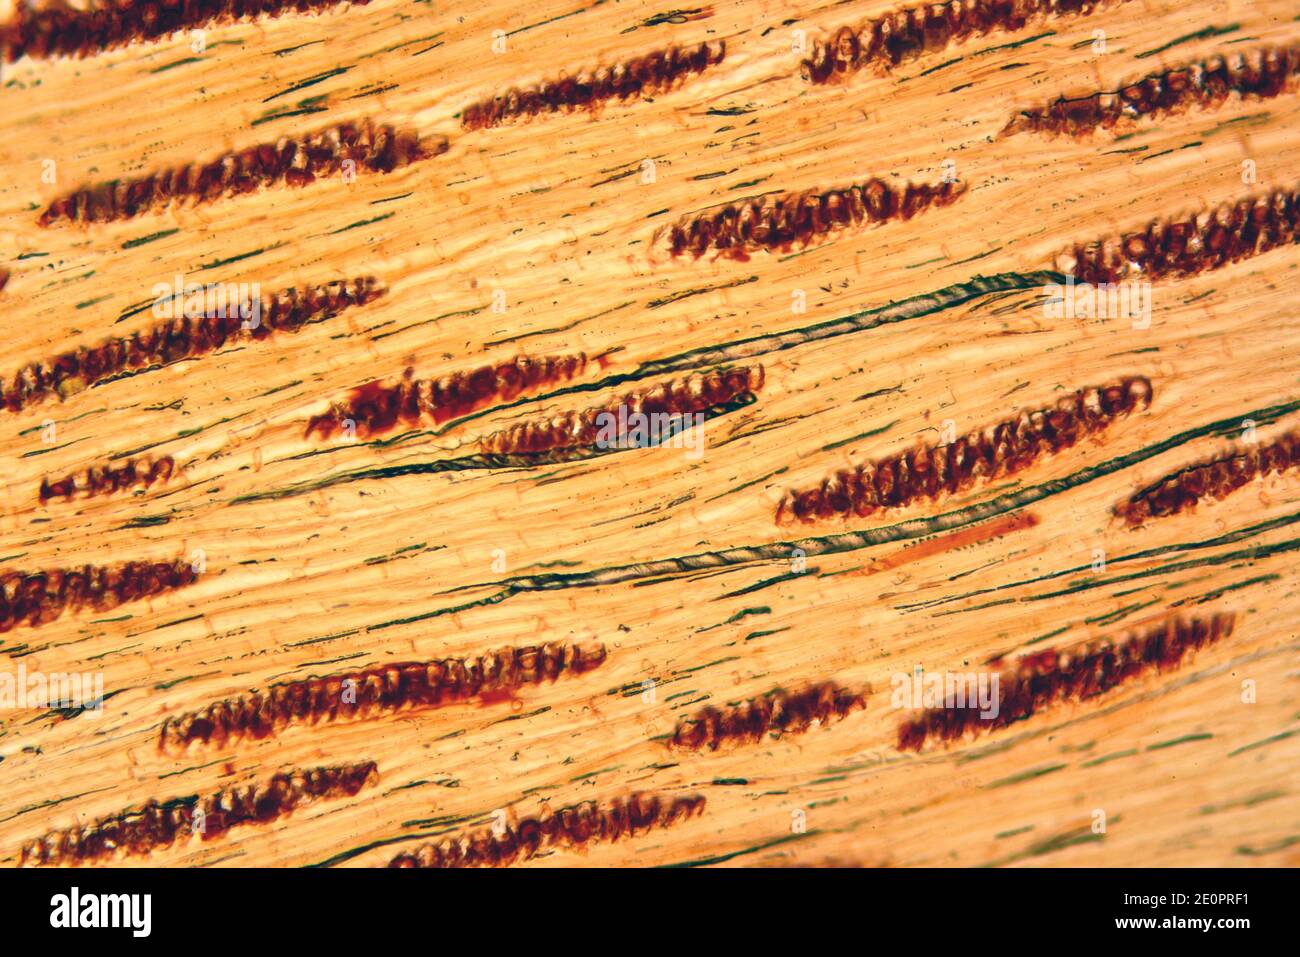 Xylem parenchyma or woody parenchyma. Photomicrograph X100 at 10 cm wide. Stock Photo